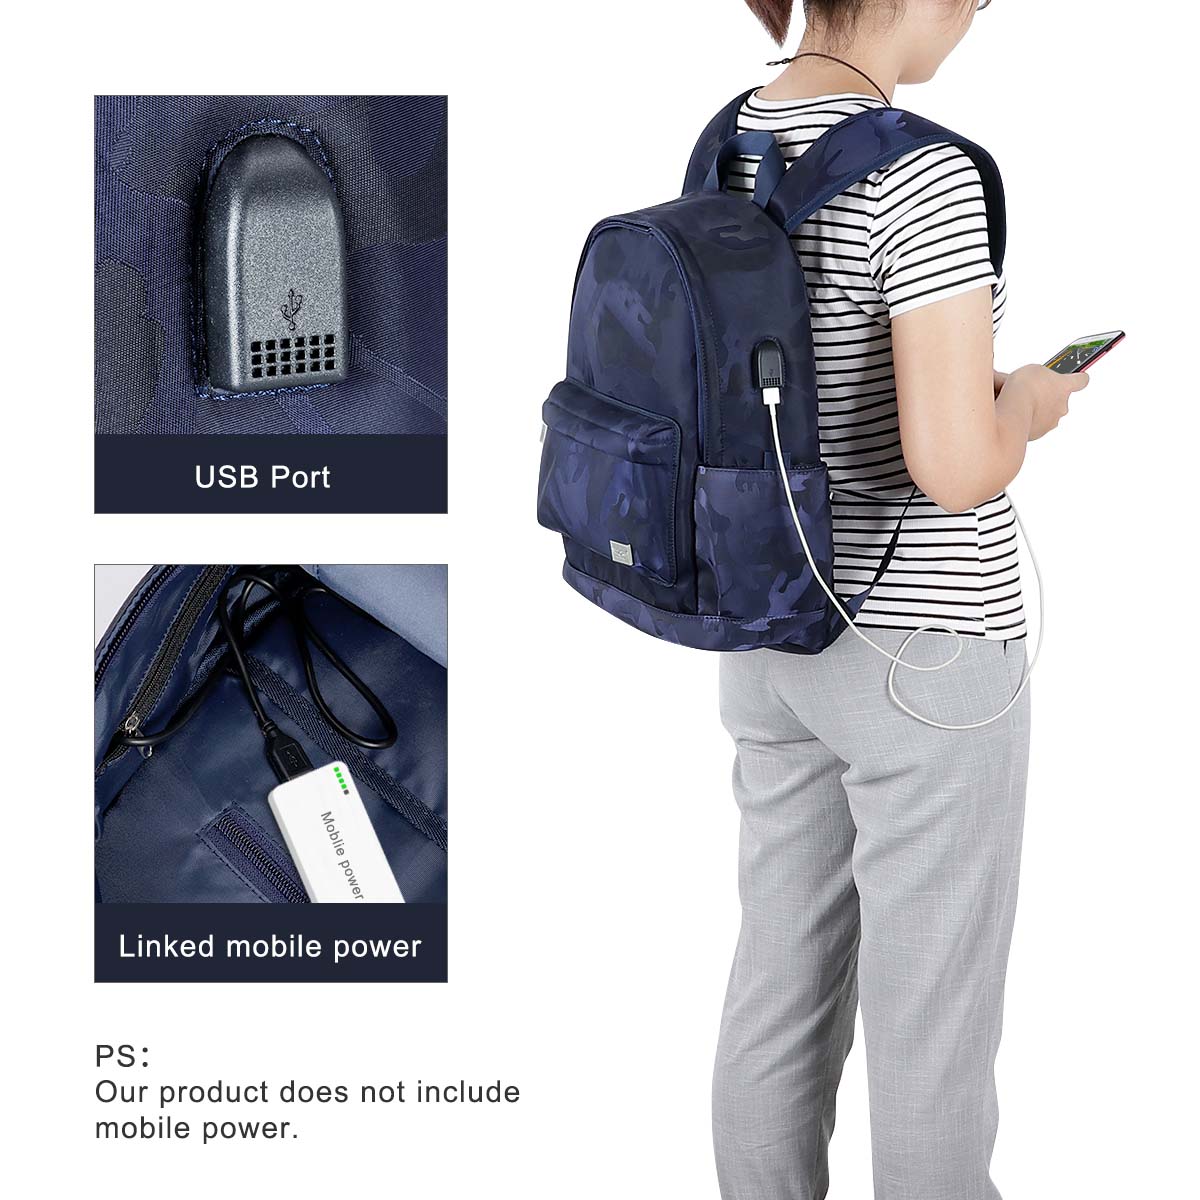 Laptop Backpack 13.3 Inch Stylish Computer Backpack School Backpack Casual Daypack Laptop Bag Water Repellent canvas Business Bag Tablet With USB Port for Travel/Business/College/Women/Men/students - image 3 of 6